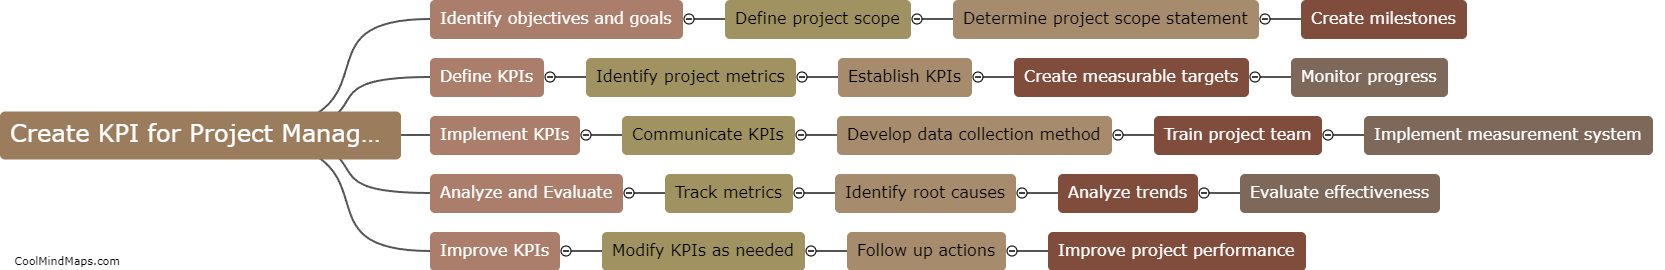 What are the steps to create a KPI for project management?